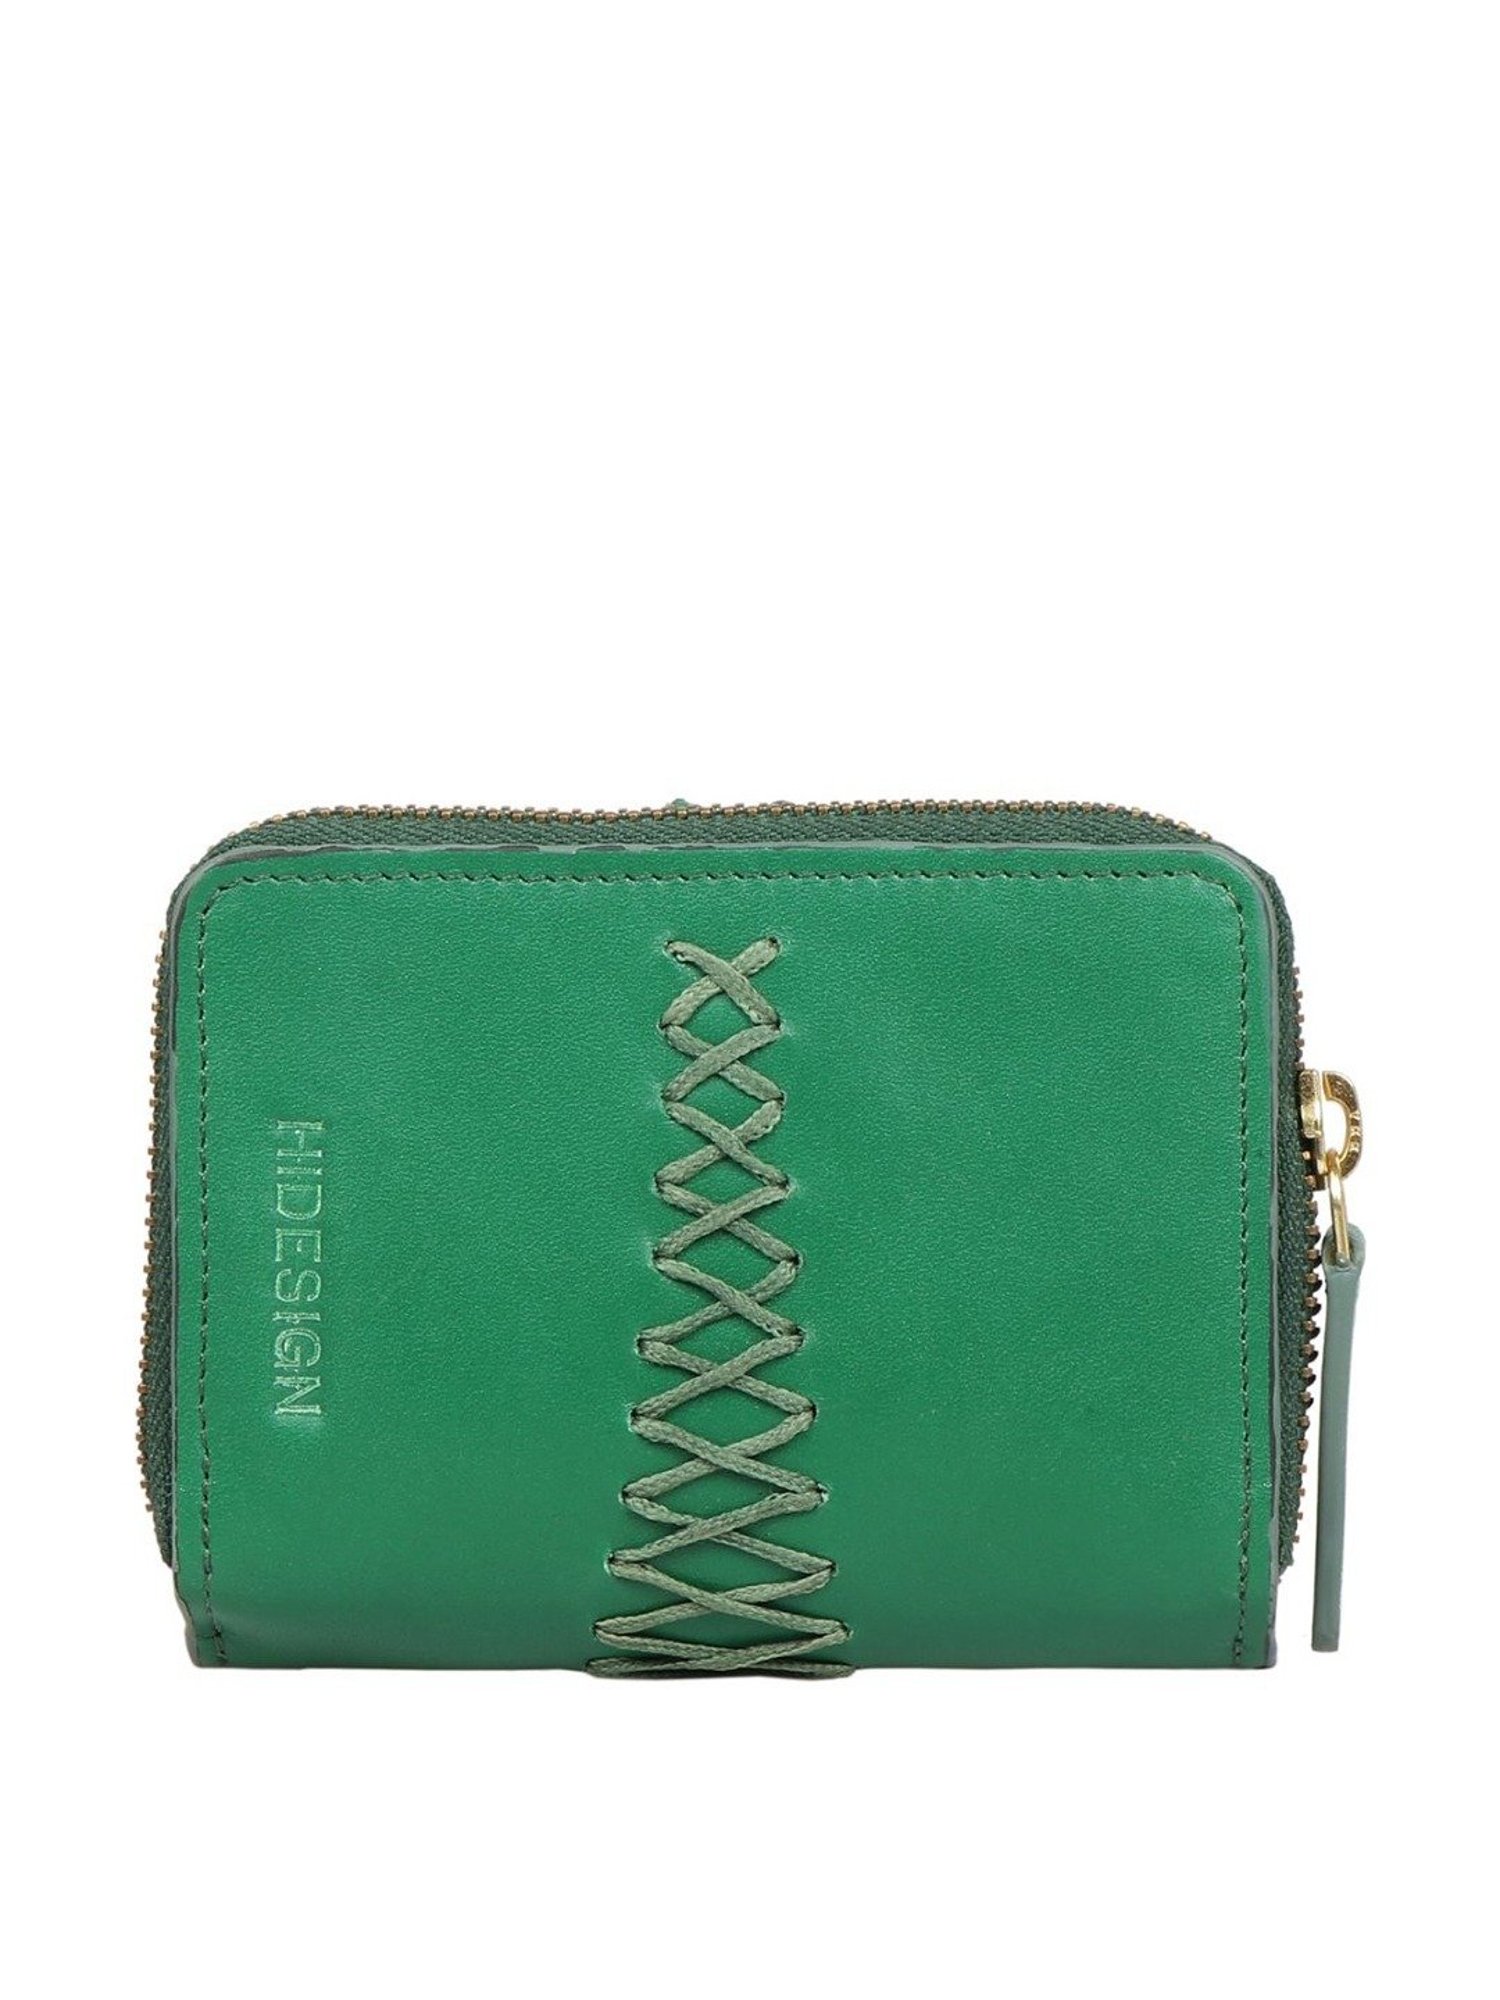 Palm Green Small Zip Pouch | Leather Clutch Bag at KMM & Co.